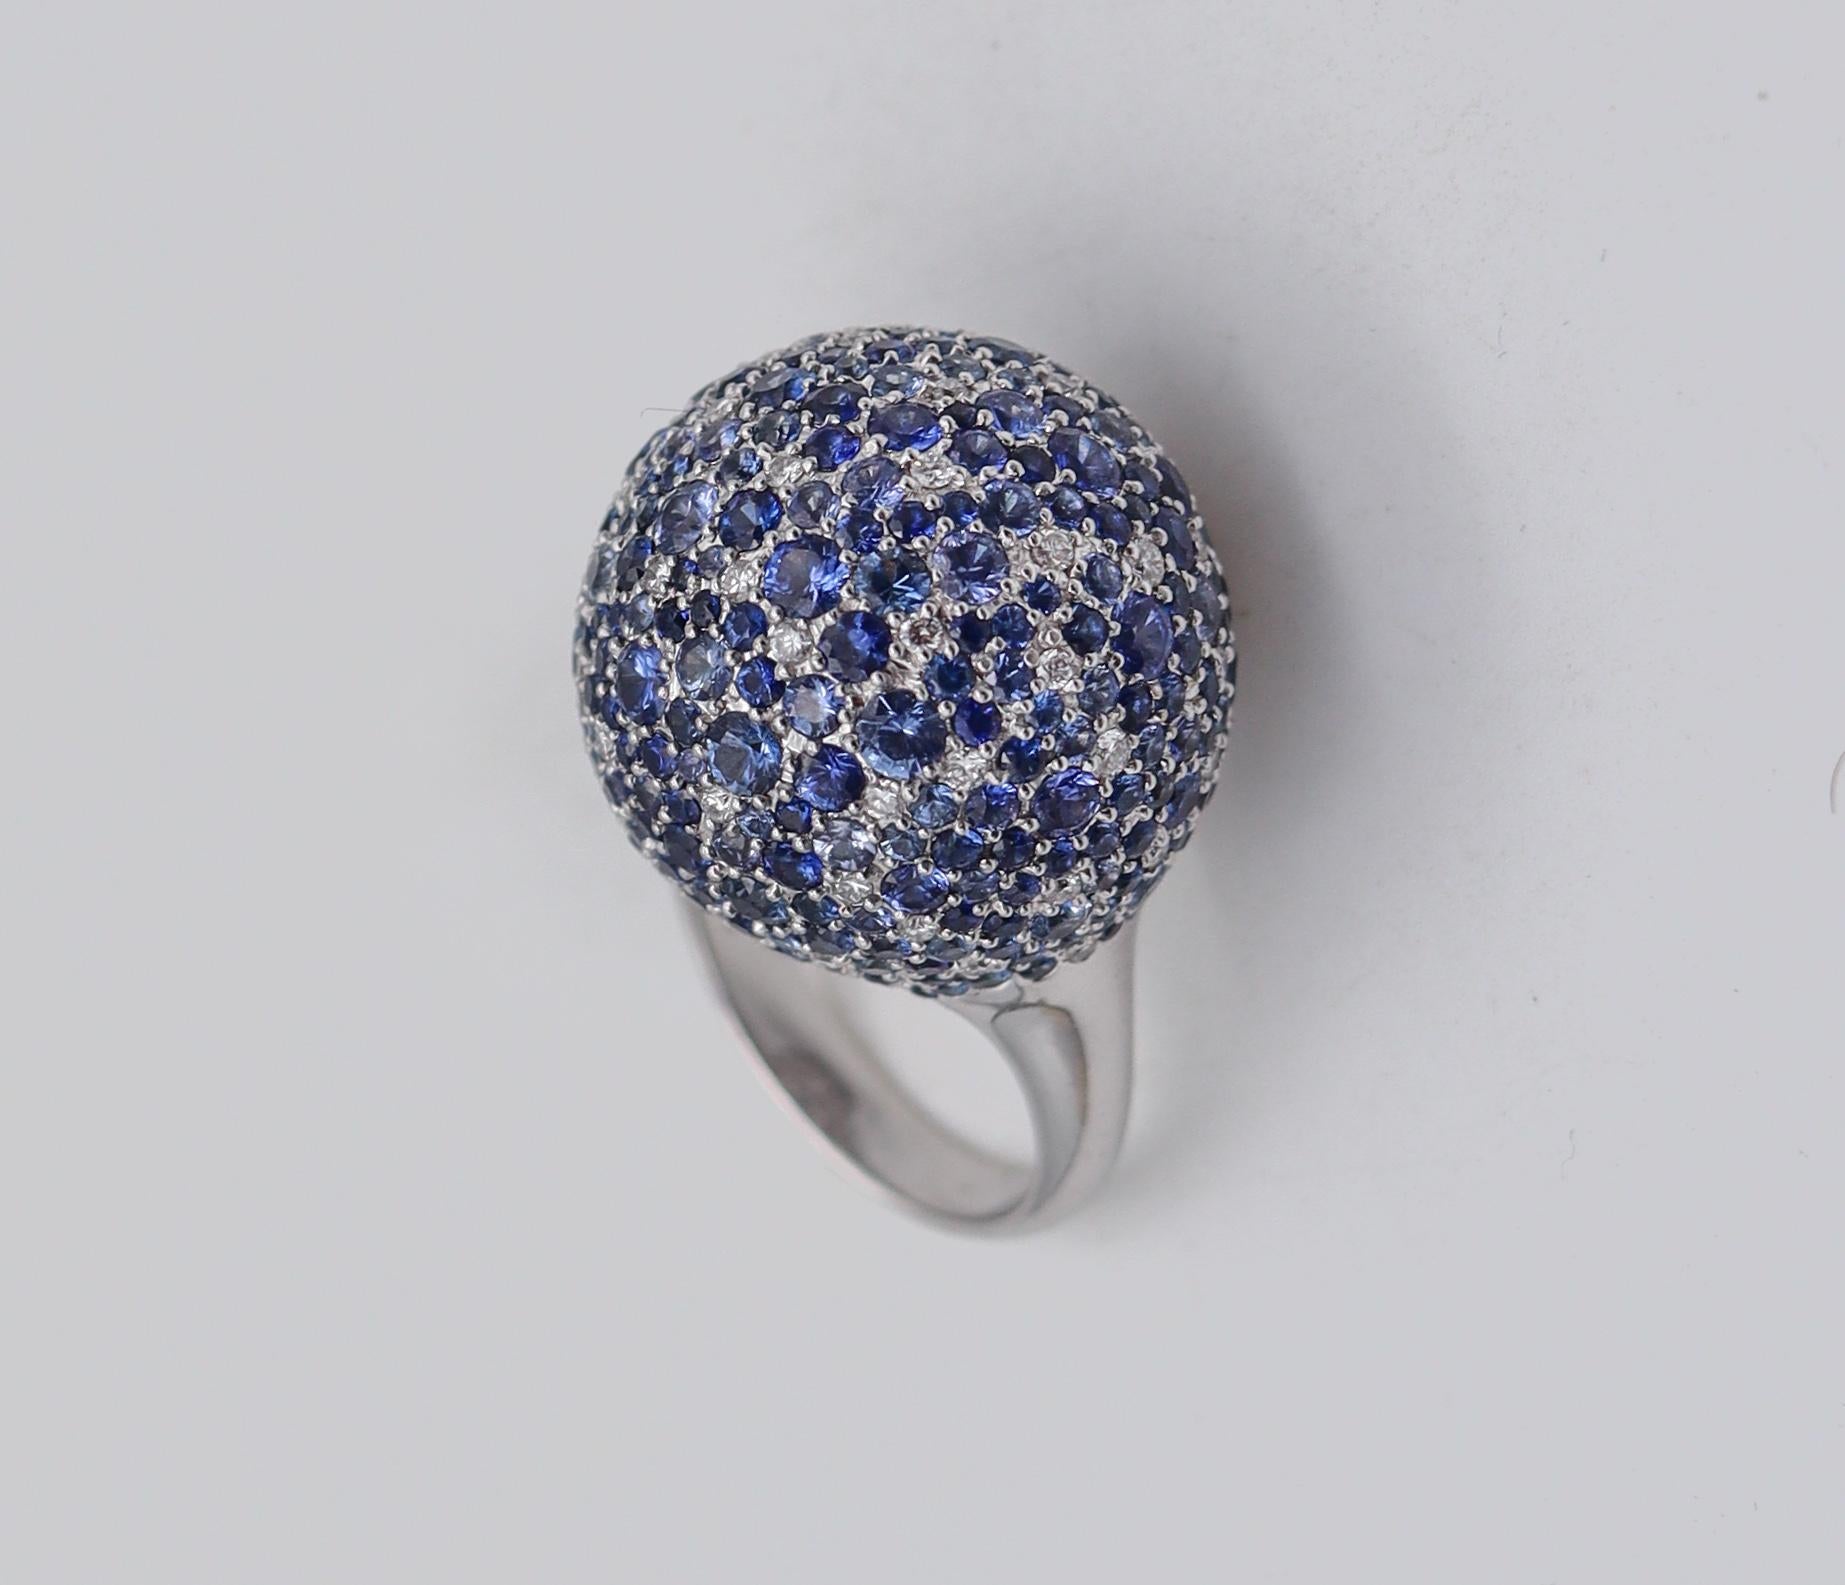 Modernist Contemporary Sphere Cocktail Ring 18Kt Gold with 11.87 Ctw Diamonds & Sapphires